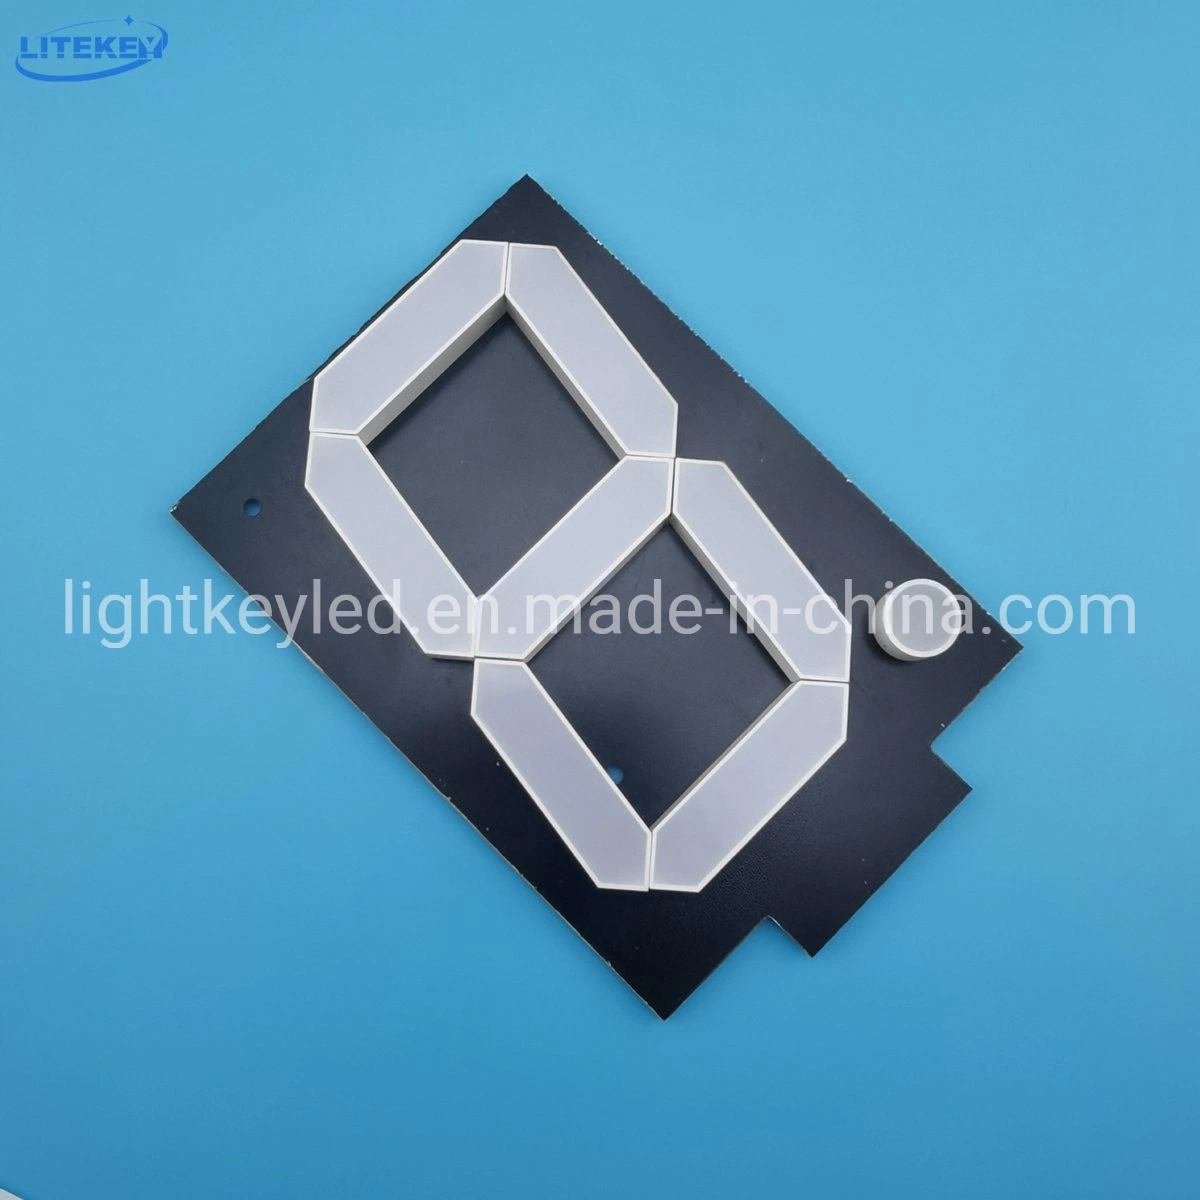 12 Inch Single Digit Assembly 7 Segment LED Display with RoHS From Expert Manufacturer